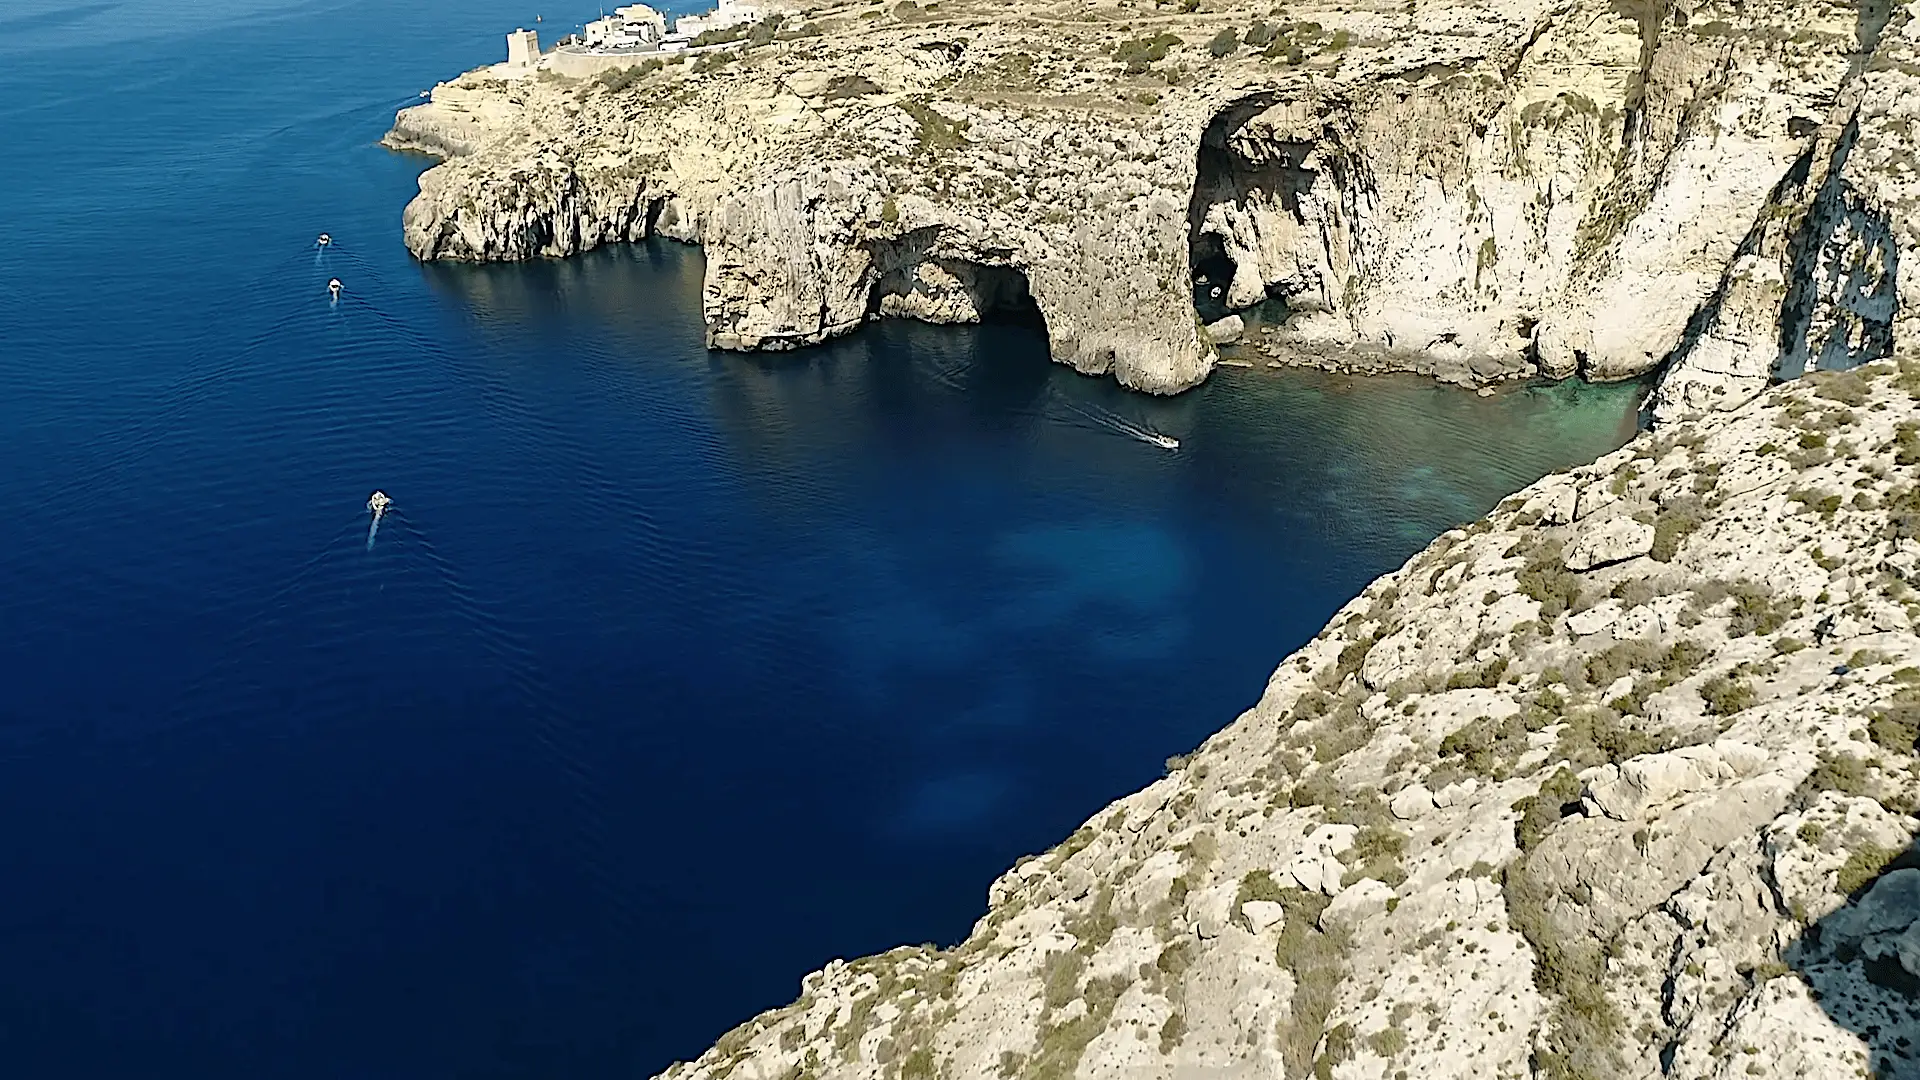 Large arch of Blue Grotto in Malta seen from the cliff